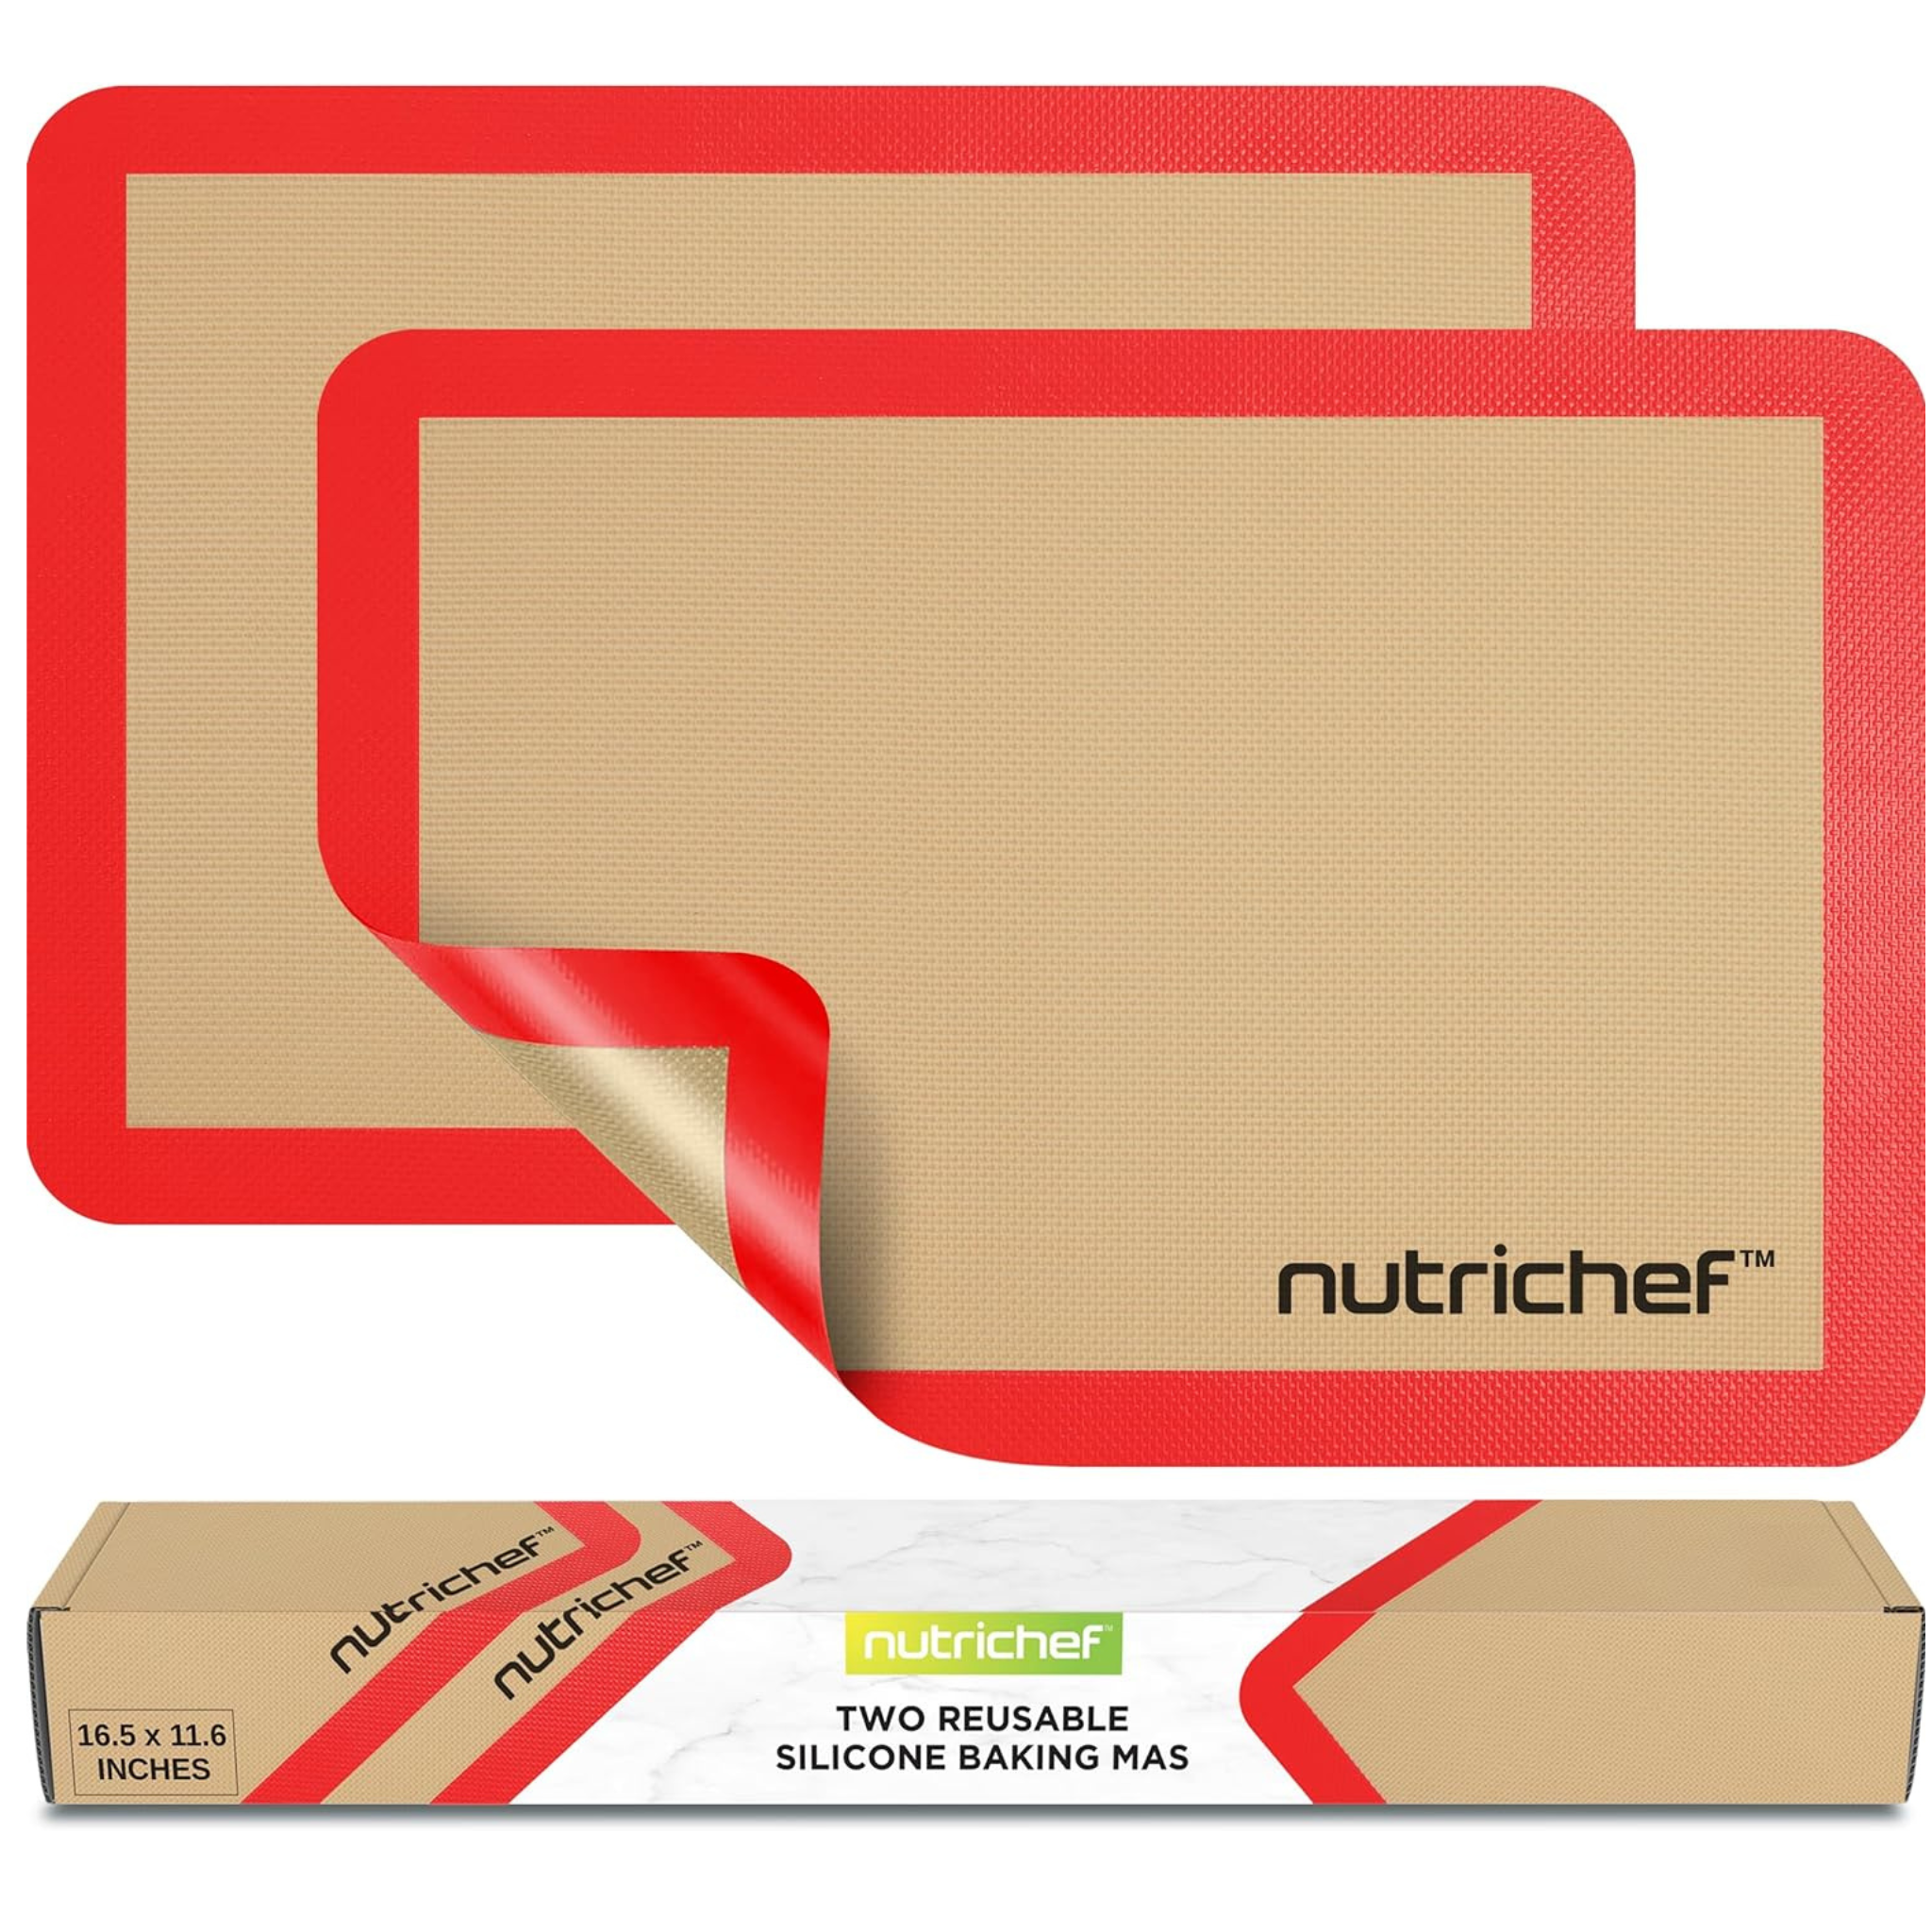 2-Count Nutrichef 16.5" x 11.6" Food-Grade Non-stick Silicone Baking Mats